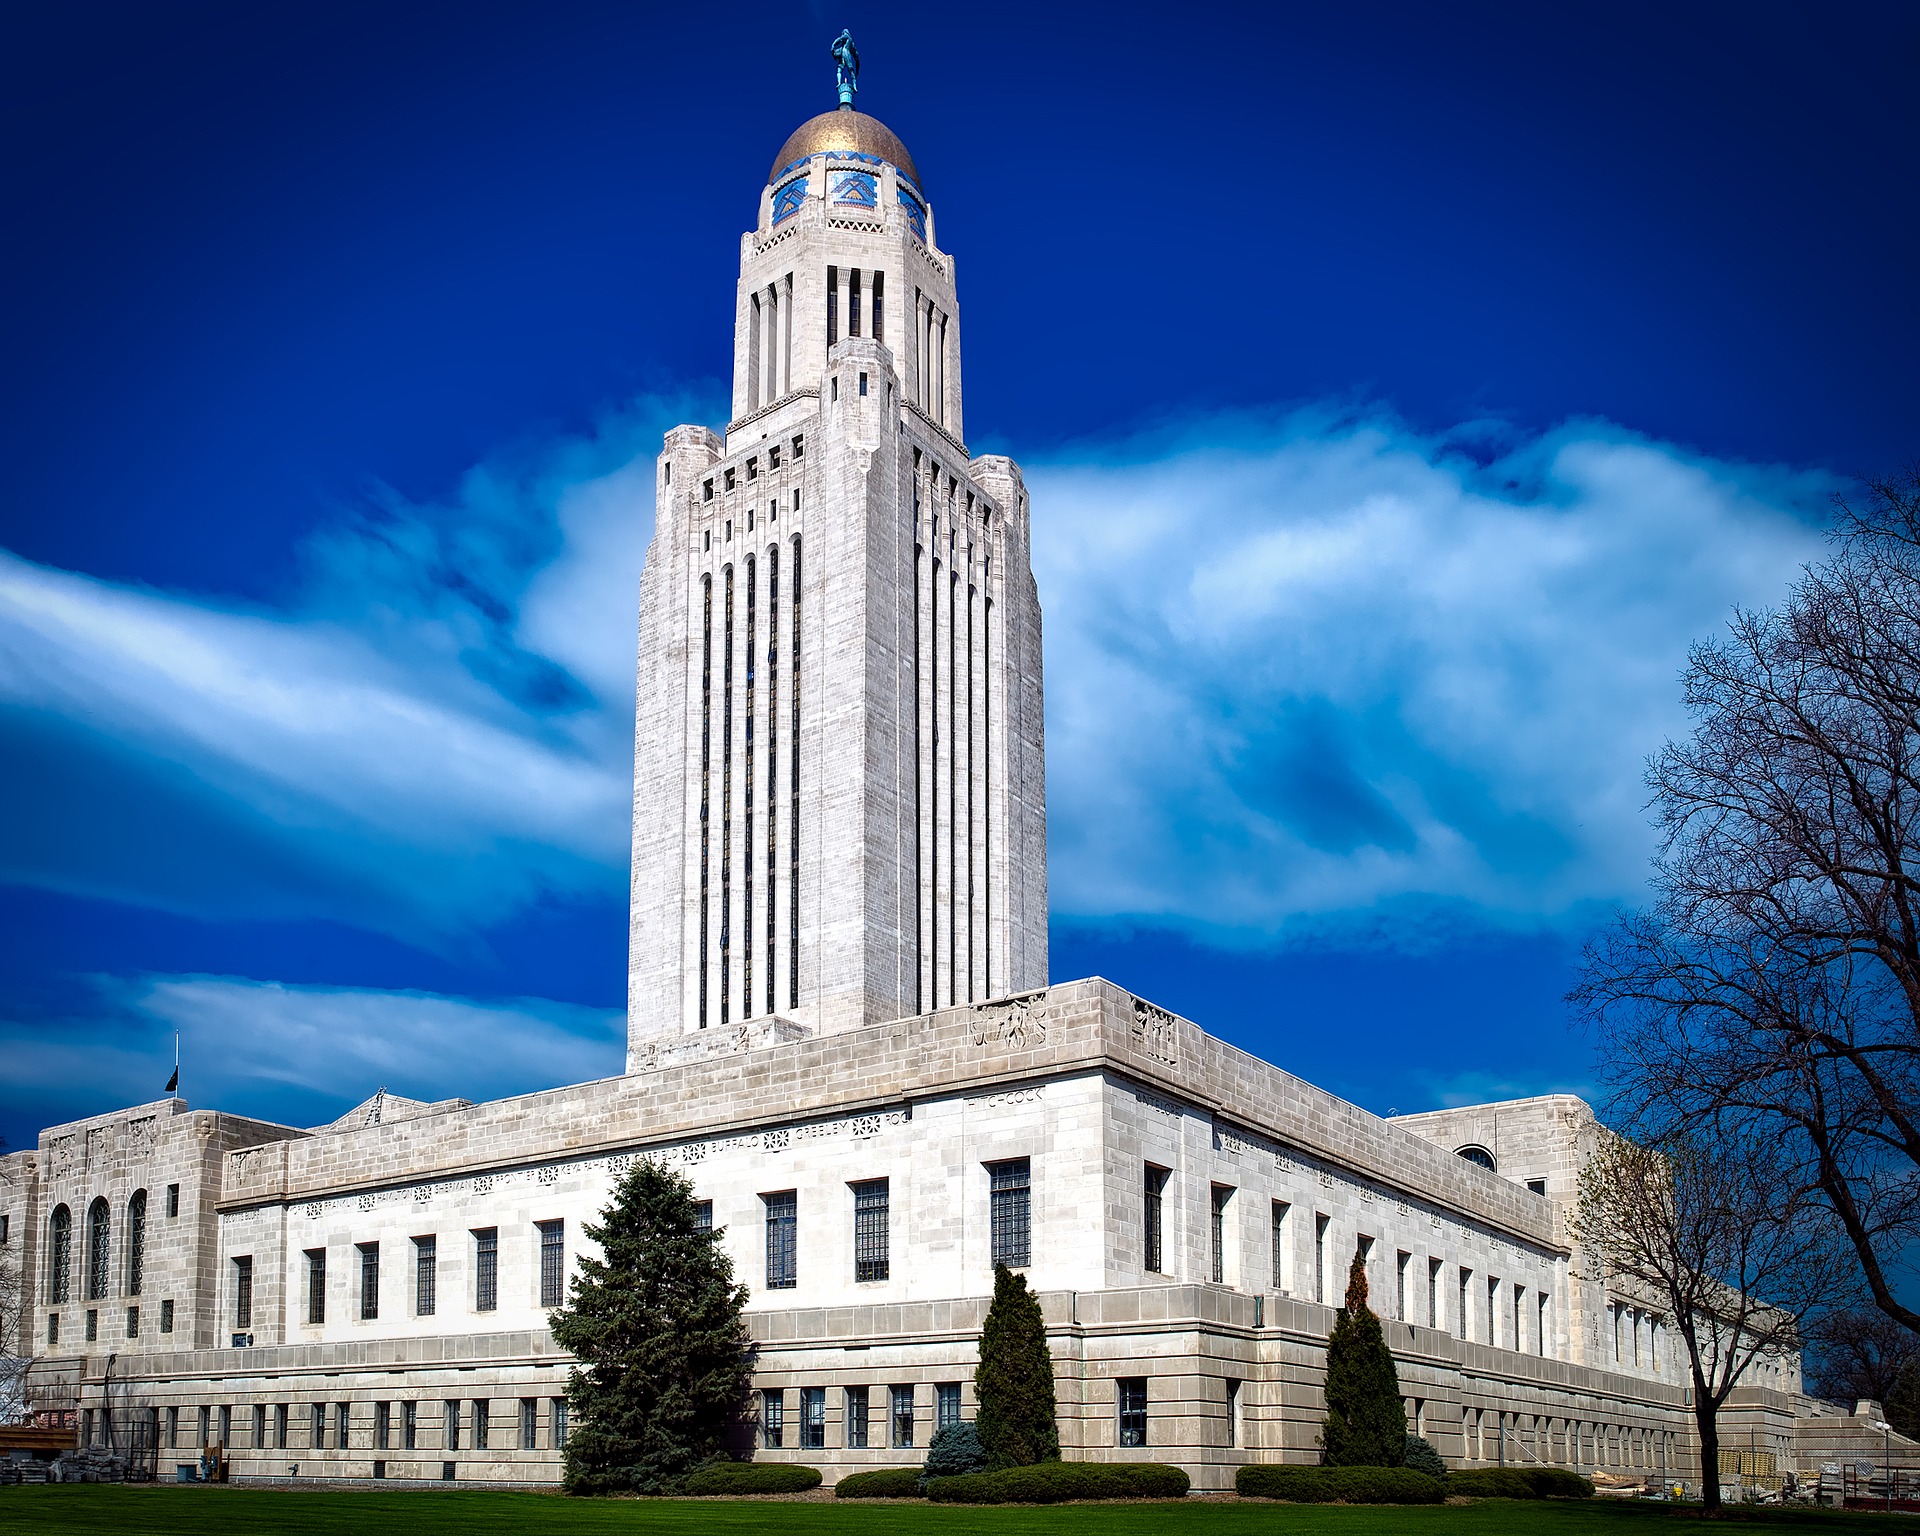 Lincoln State Capital, The main landmark of Lincoln, NE, where our electoronics company is based.